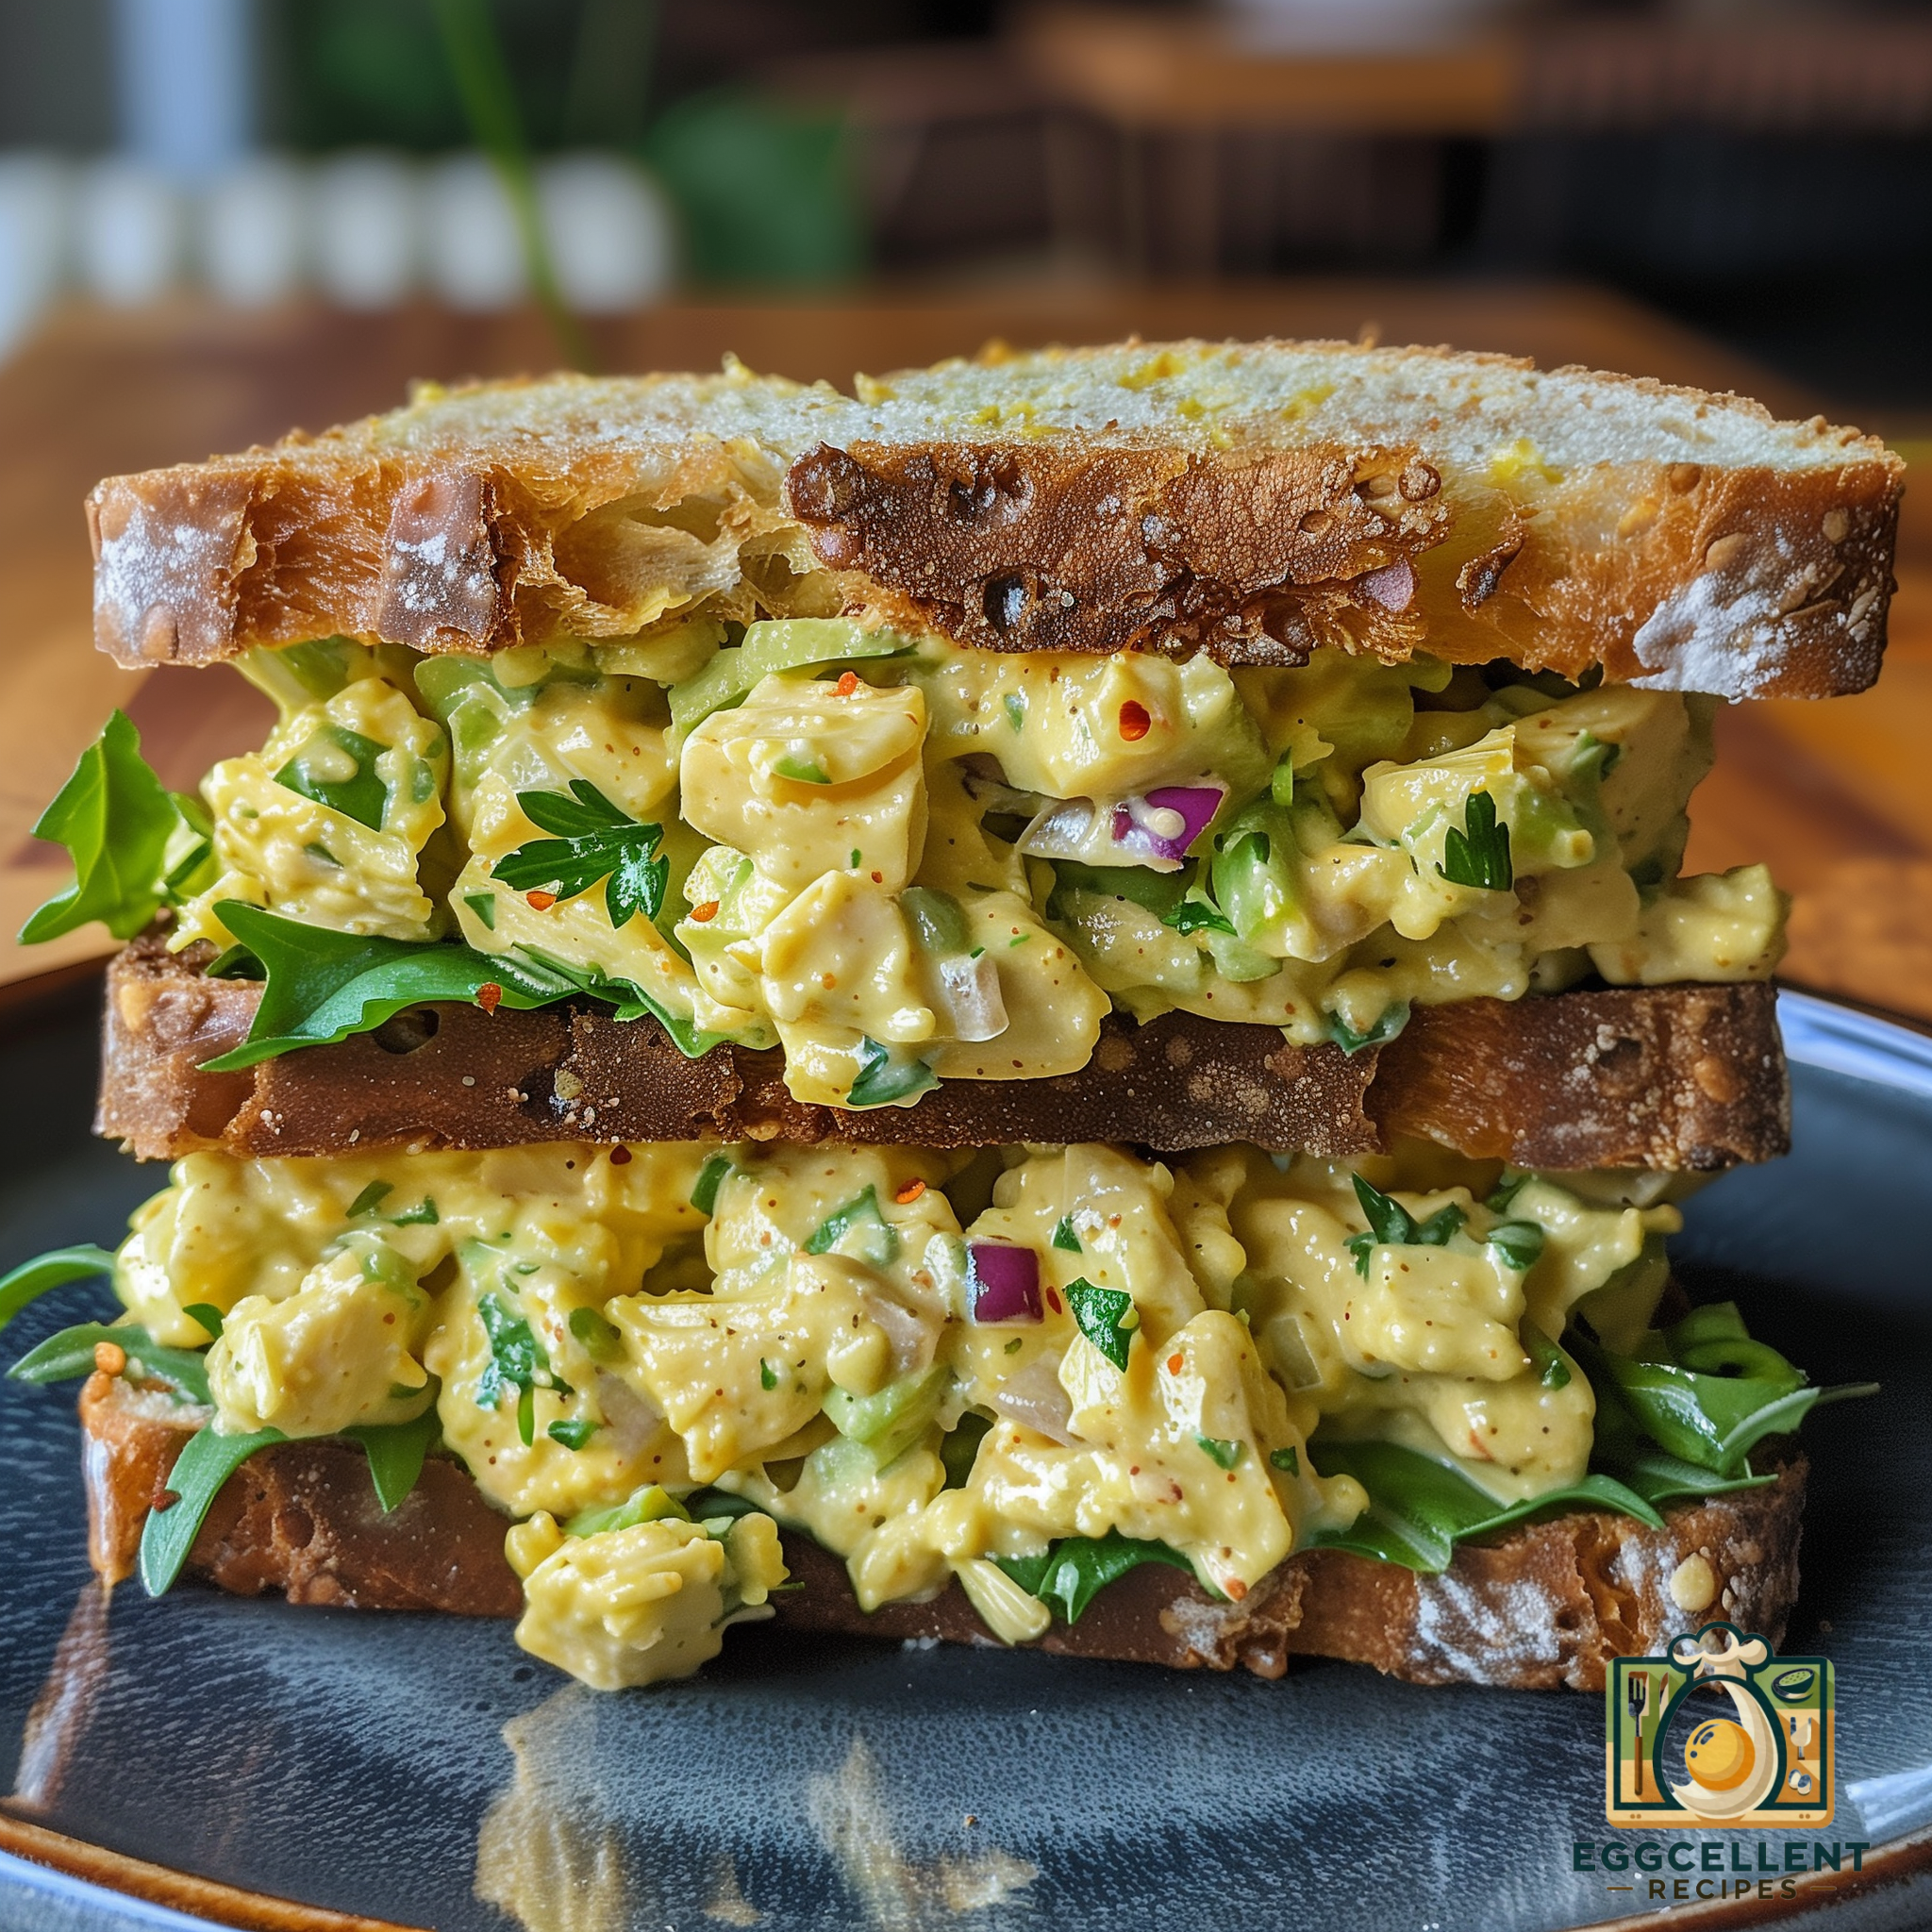 Curried Egg and Chicken Salad Sandwich Recipe